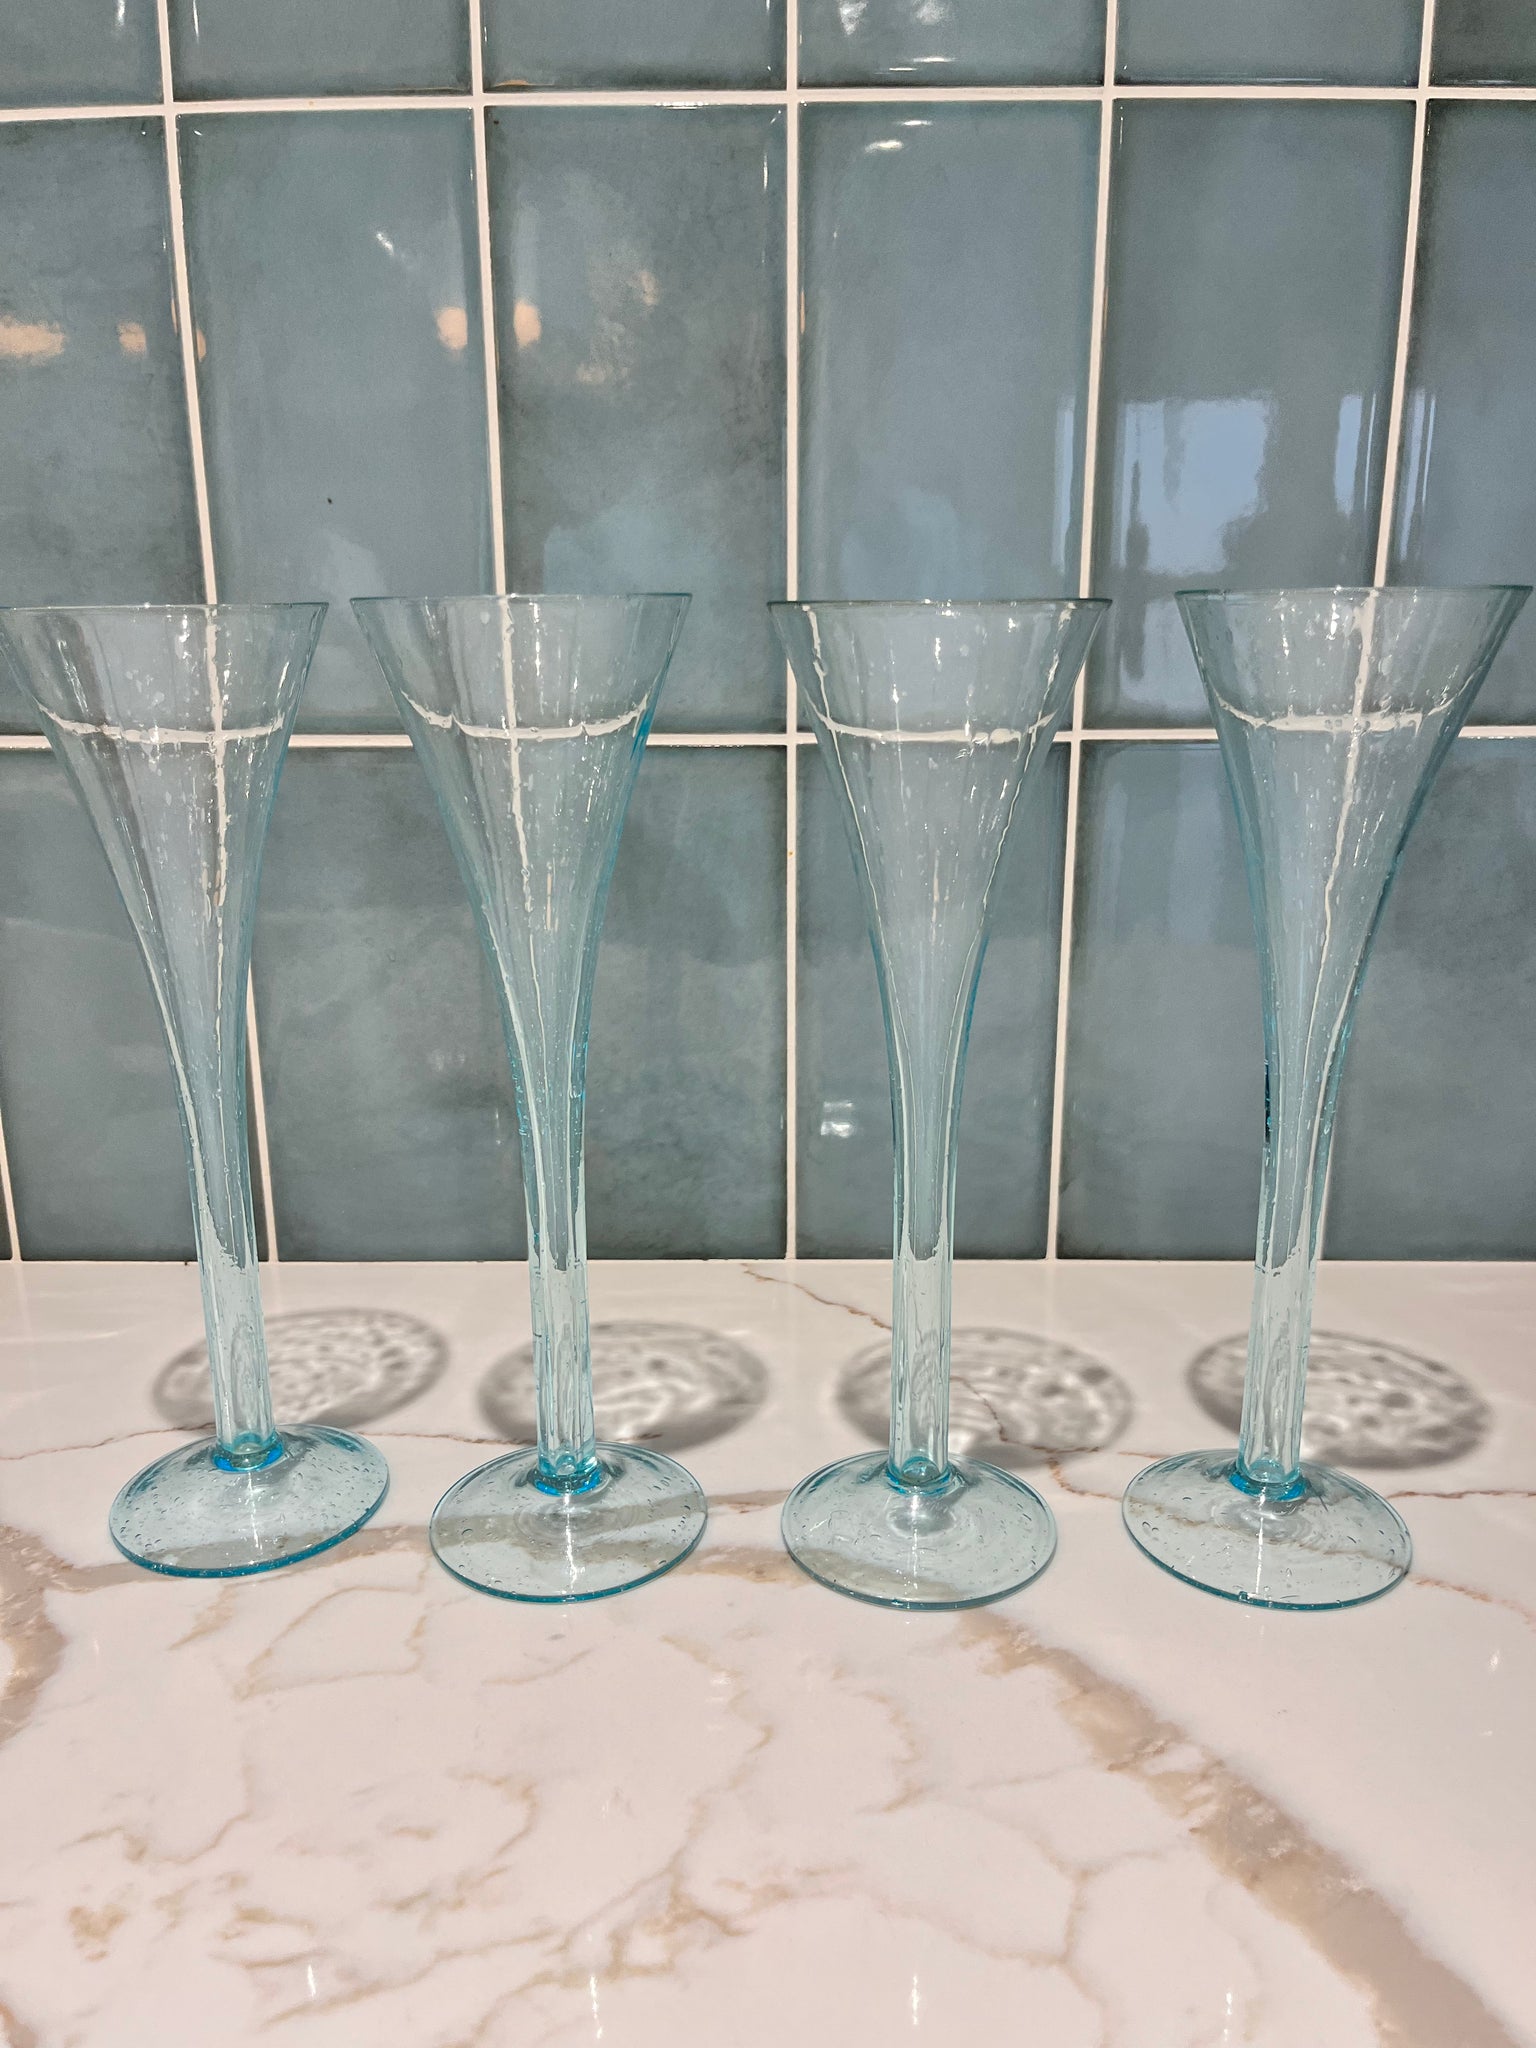 4 Champagne Flutes with hollow stems.